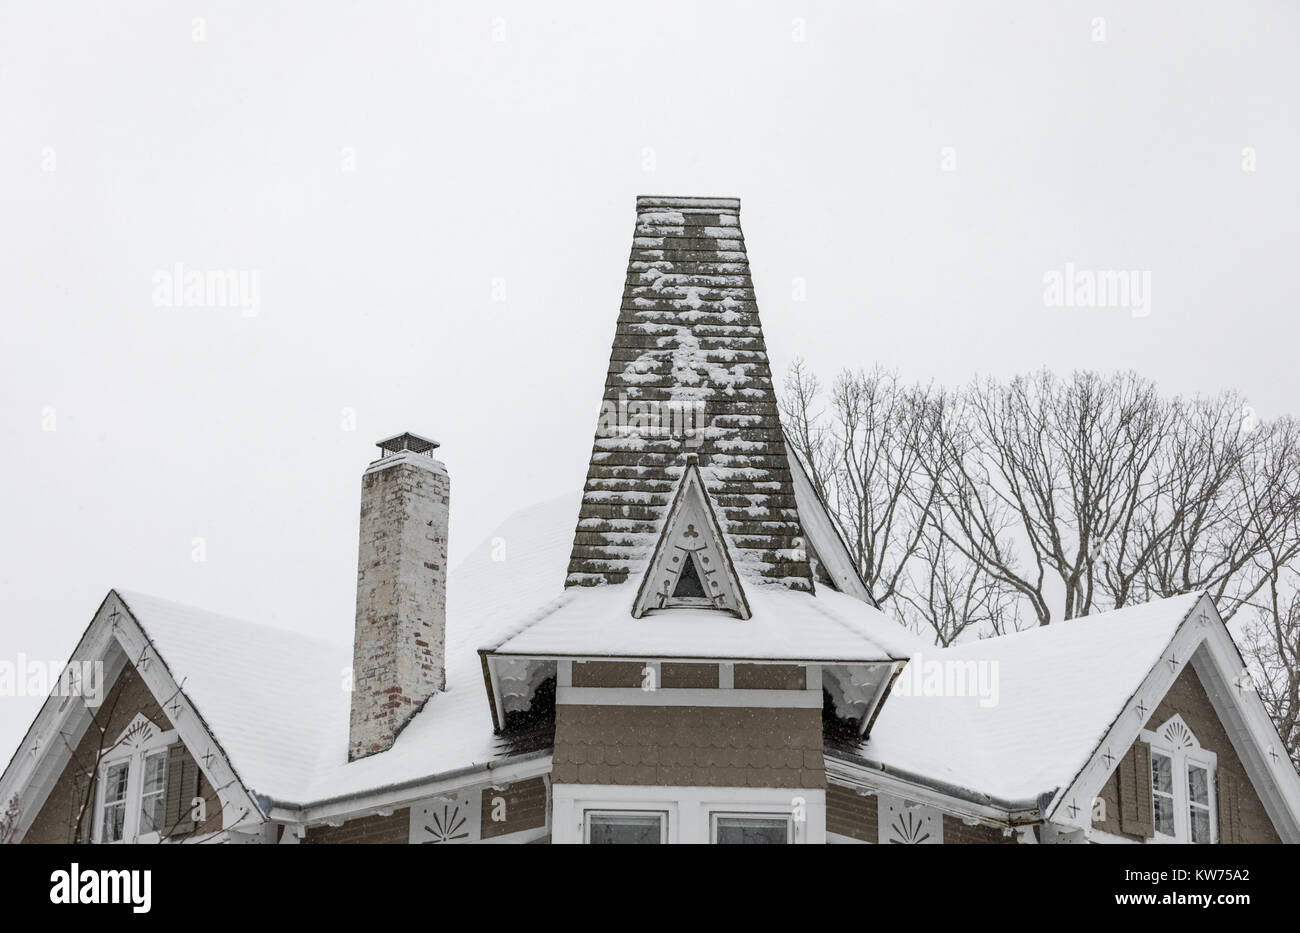 elaborate roof of an old house with snow Stock Photo